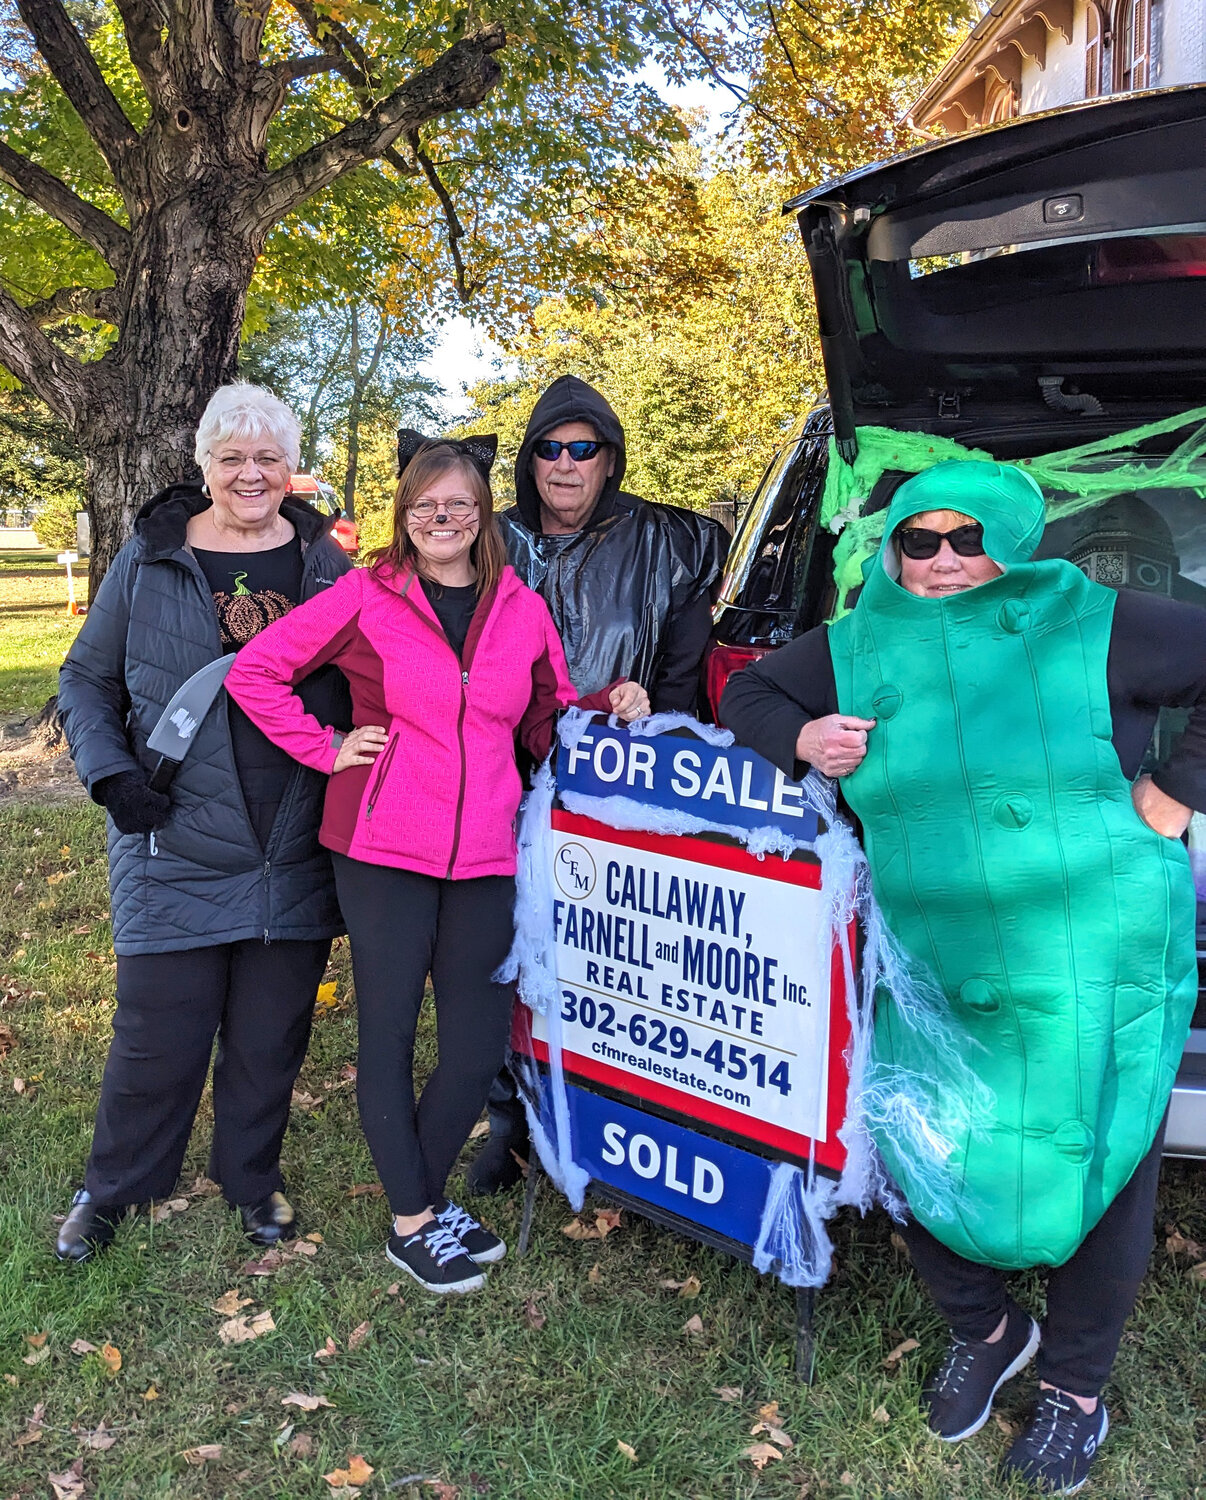 Phyllis Parker, Lindsey Schilling, Scott Reagan and Tammy Reagan of Callaway, Farnell and Moore, Inc. Real Estate participated in the Trunk or Treat event during the Seaford Community Fall Festival.